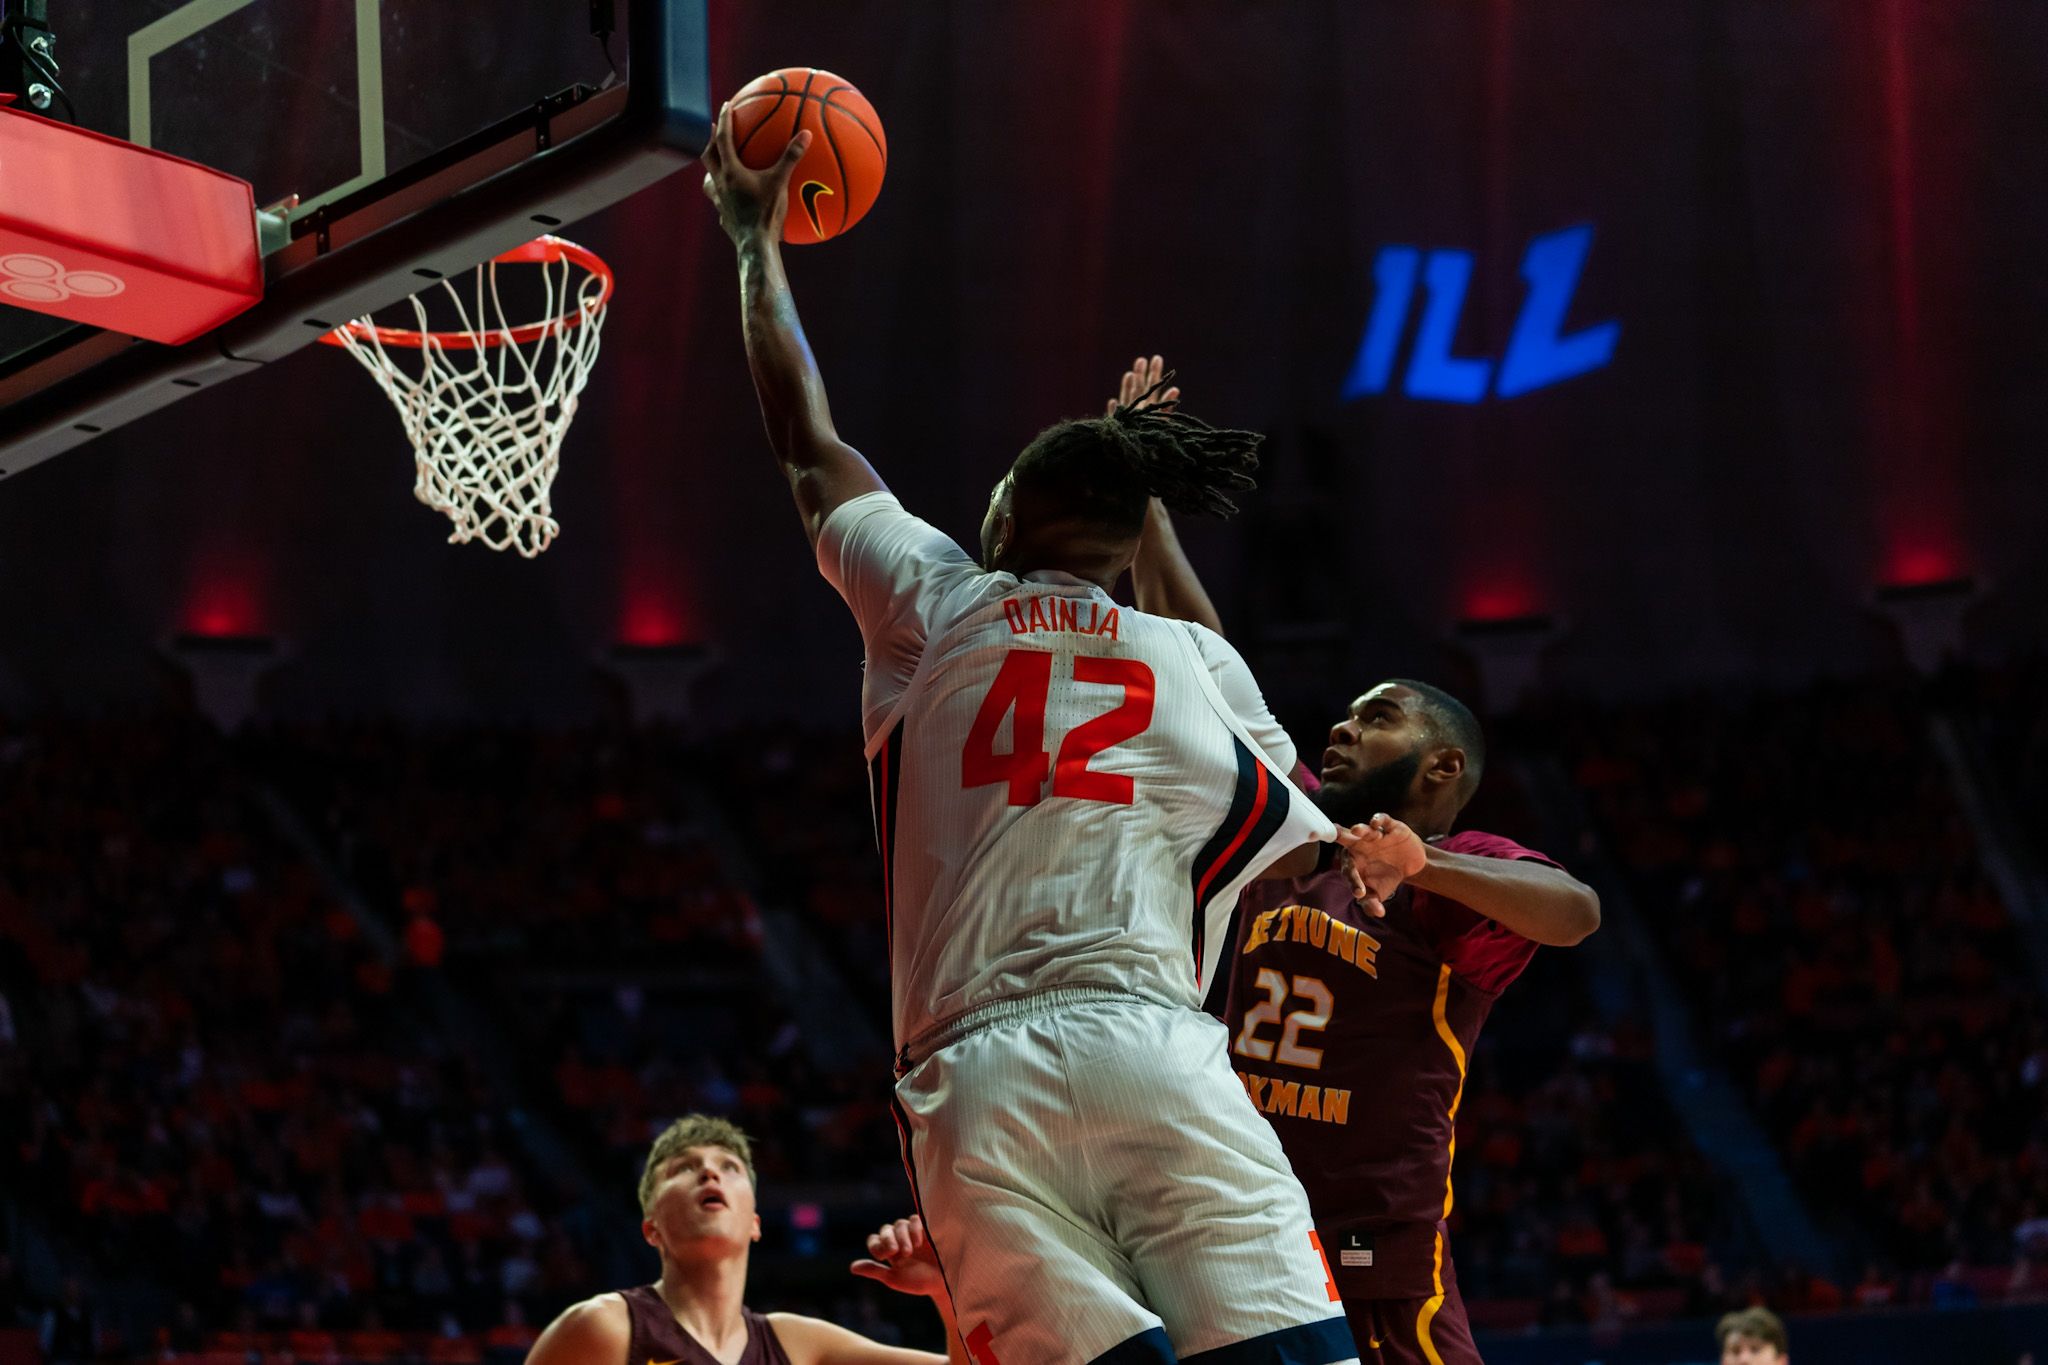 Lineup, Wardrobe, Defensive Changes Lift Illini To 85-52 Rout of Bethune-Cookman